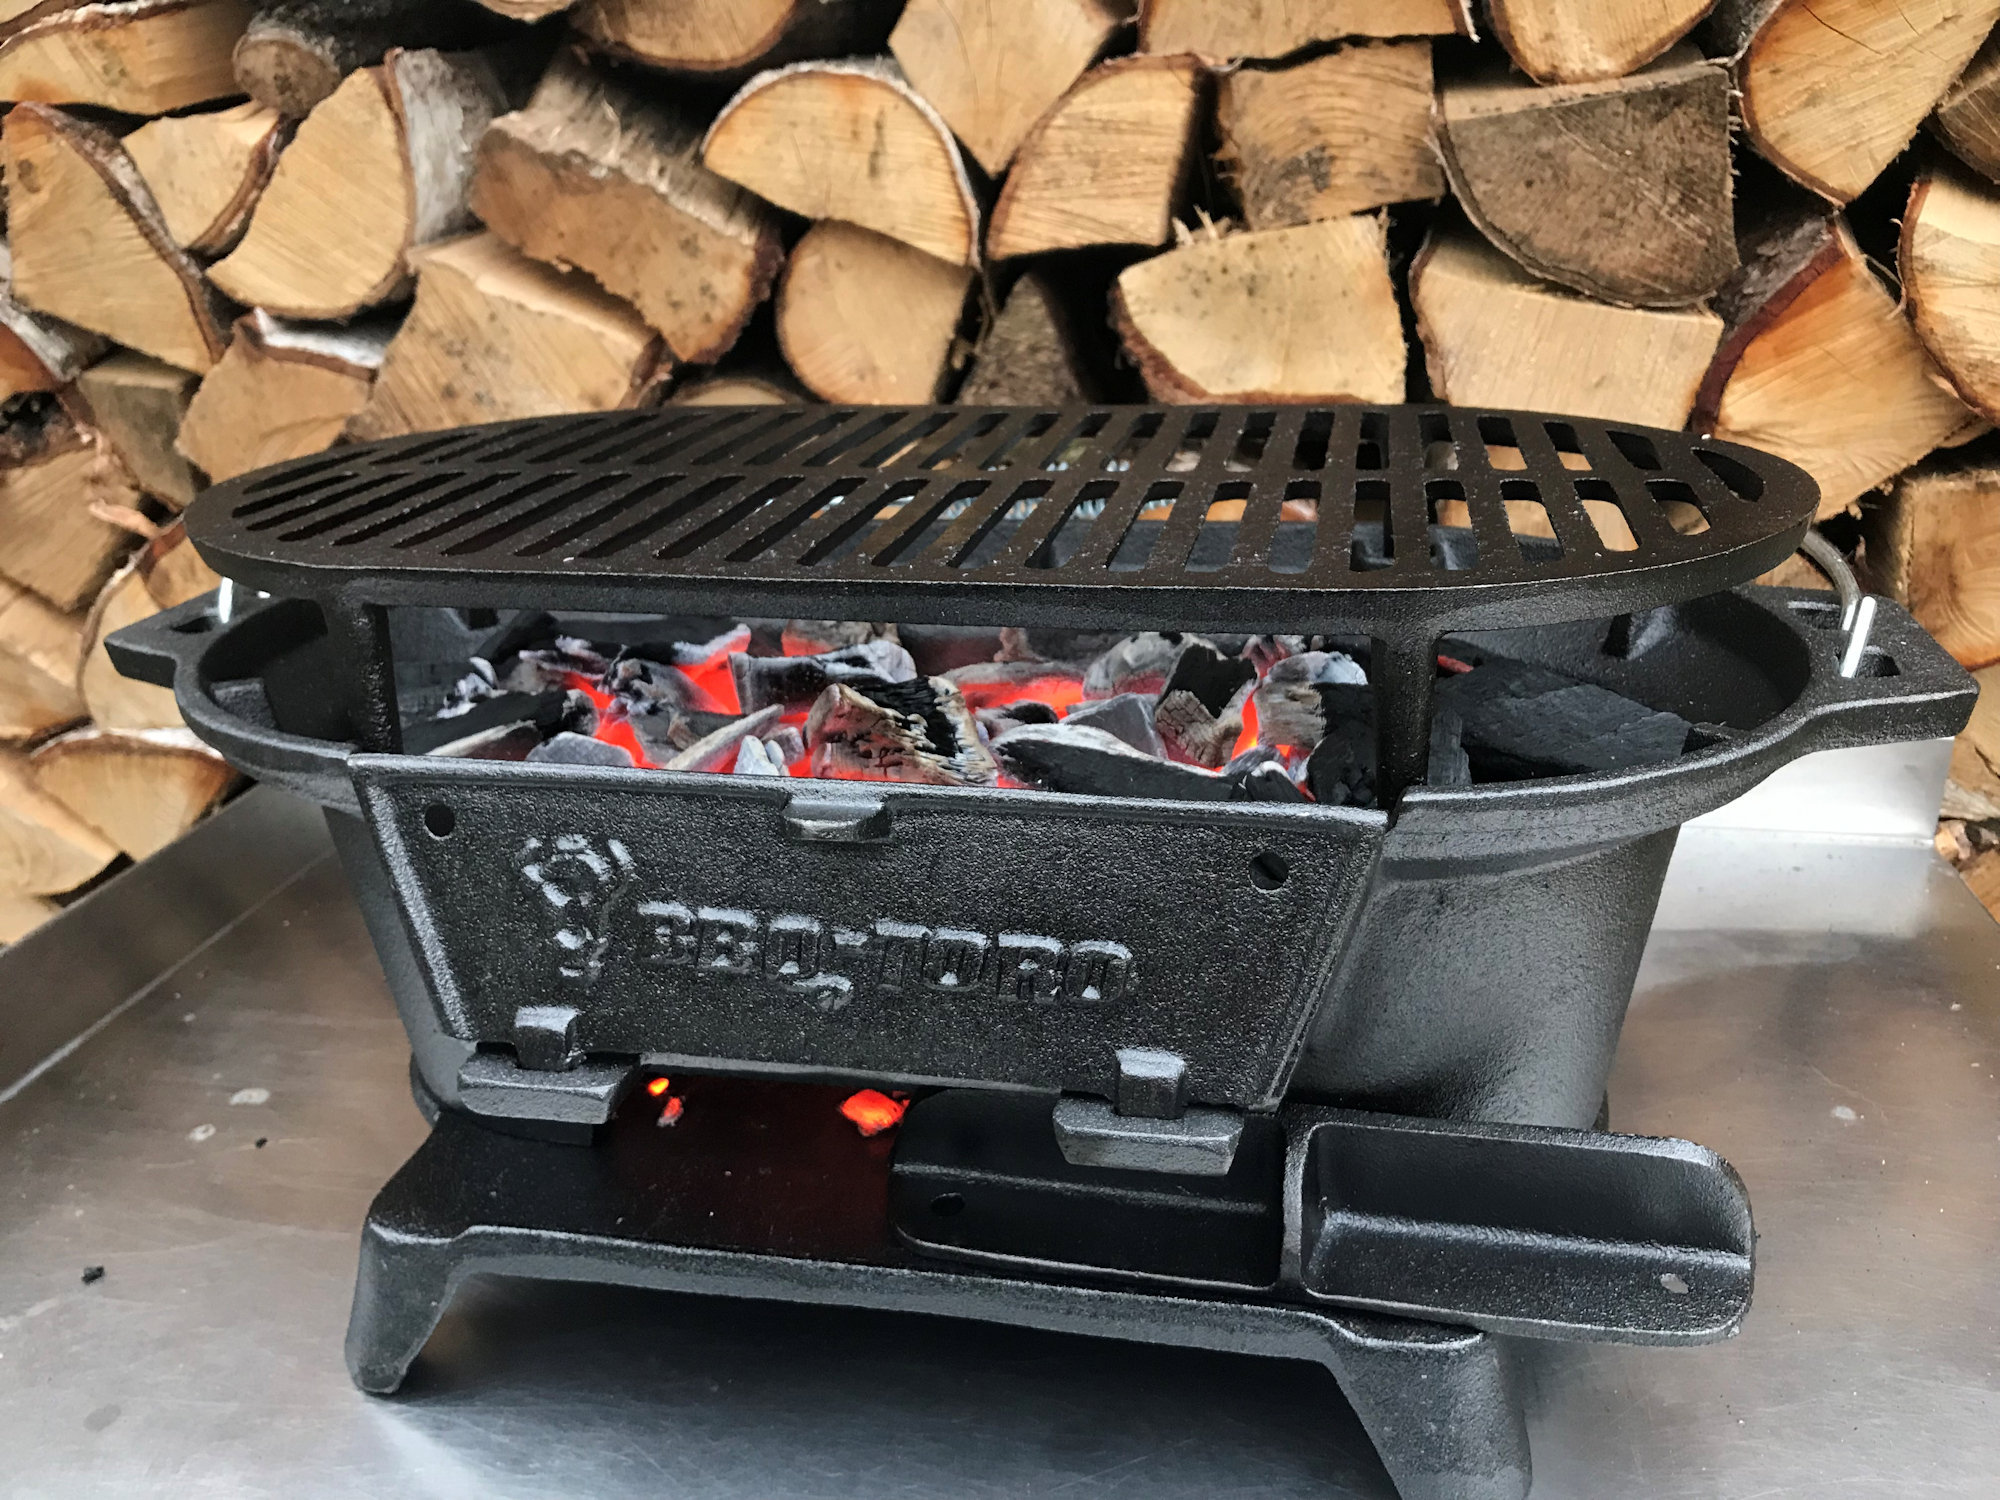 BBQ-Toro eBay Holzkohle Gusseisen Grilltopf | Hibachi Campinggrill Grillrost mit Style